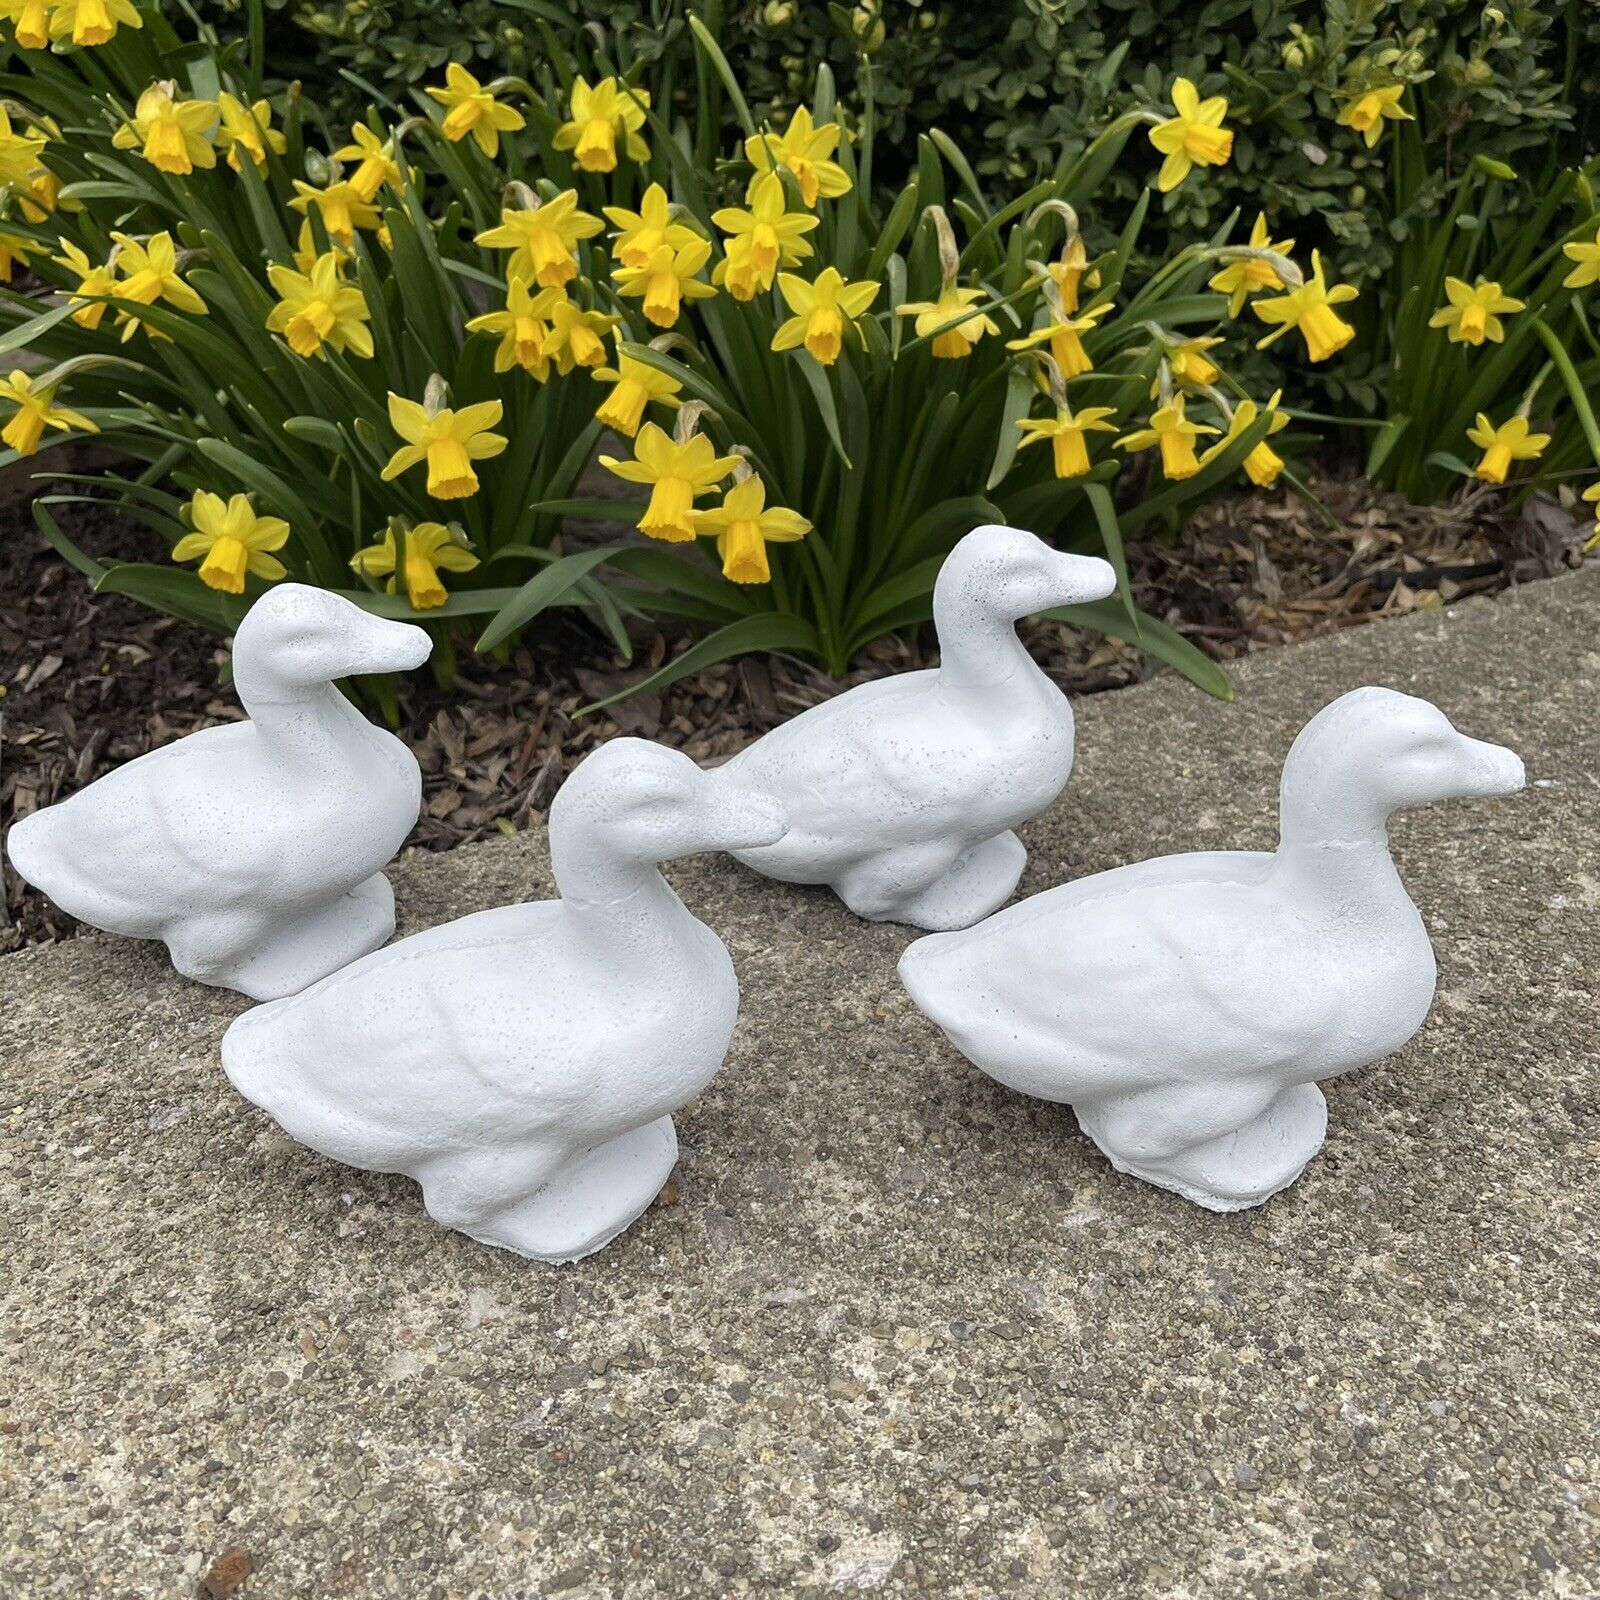 Scratch New products, world's highest quality popular! And Dent Lot cement duck 4.5” garden statue Concrete Our shop OFFers the best service duc